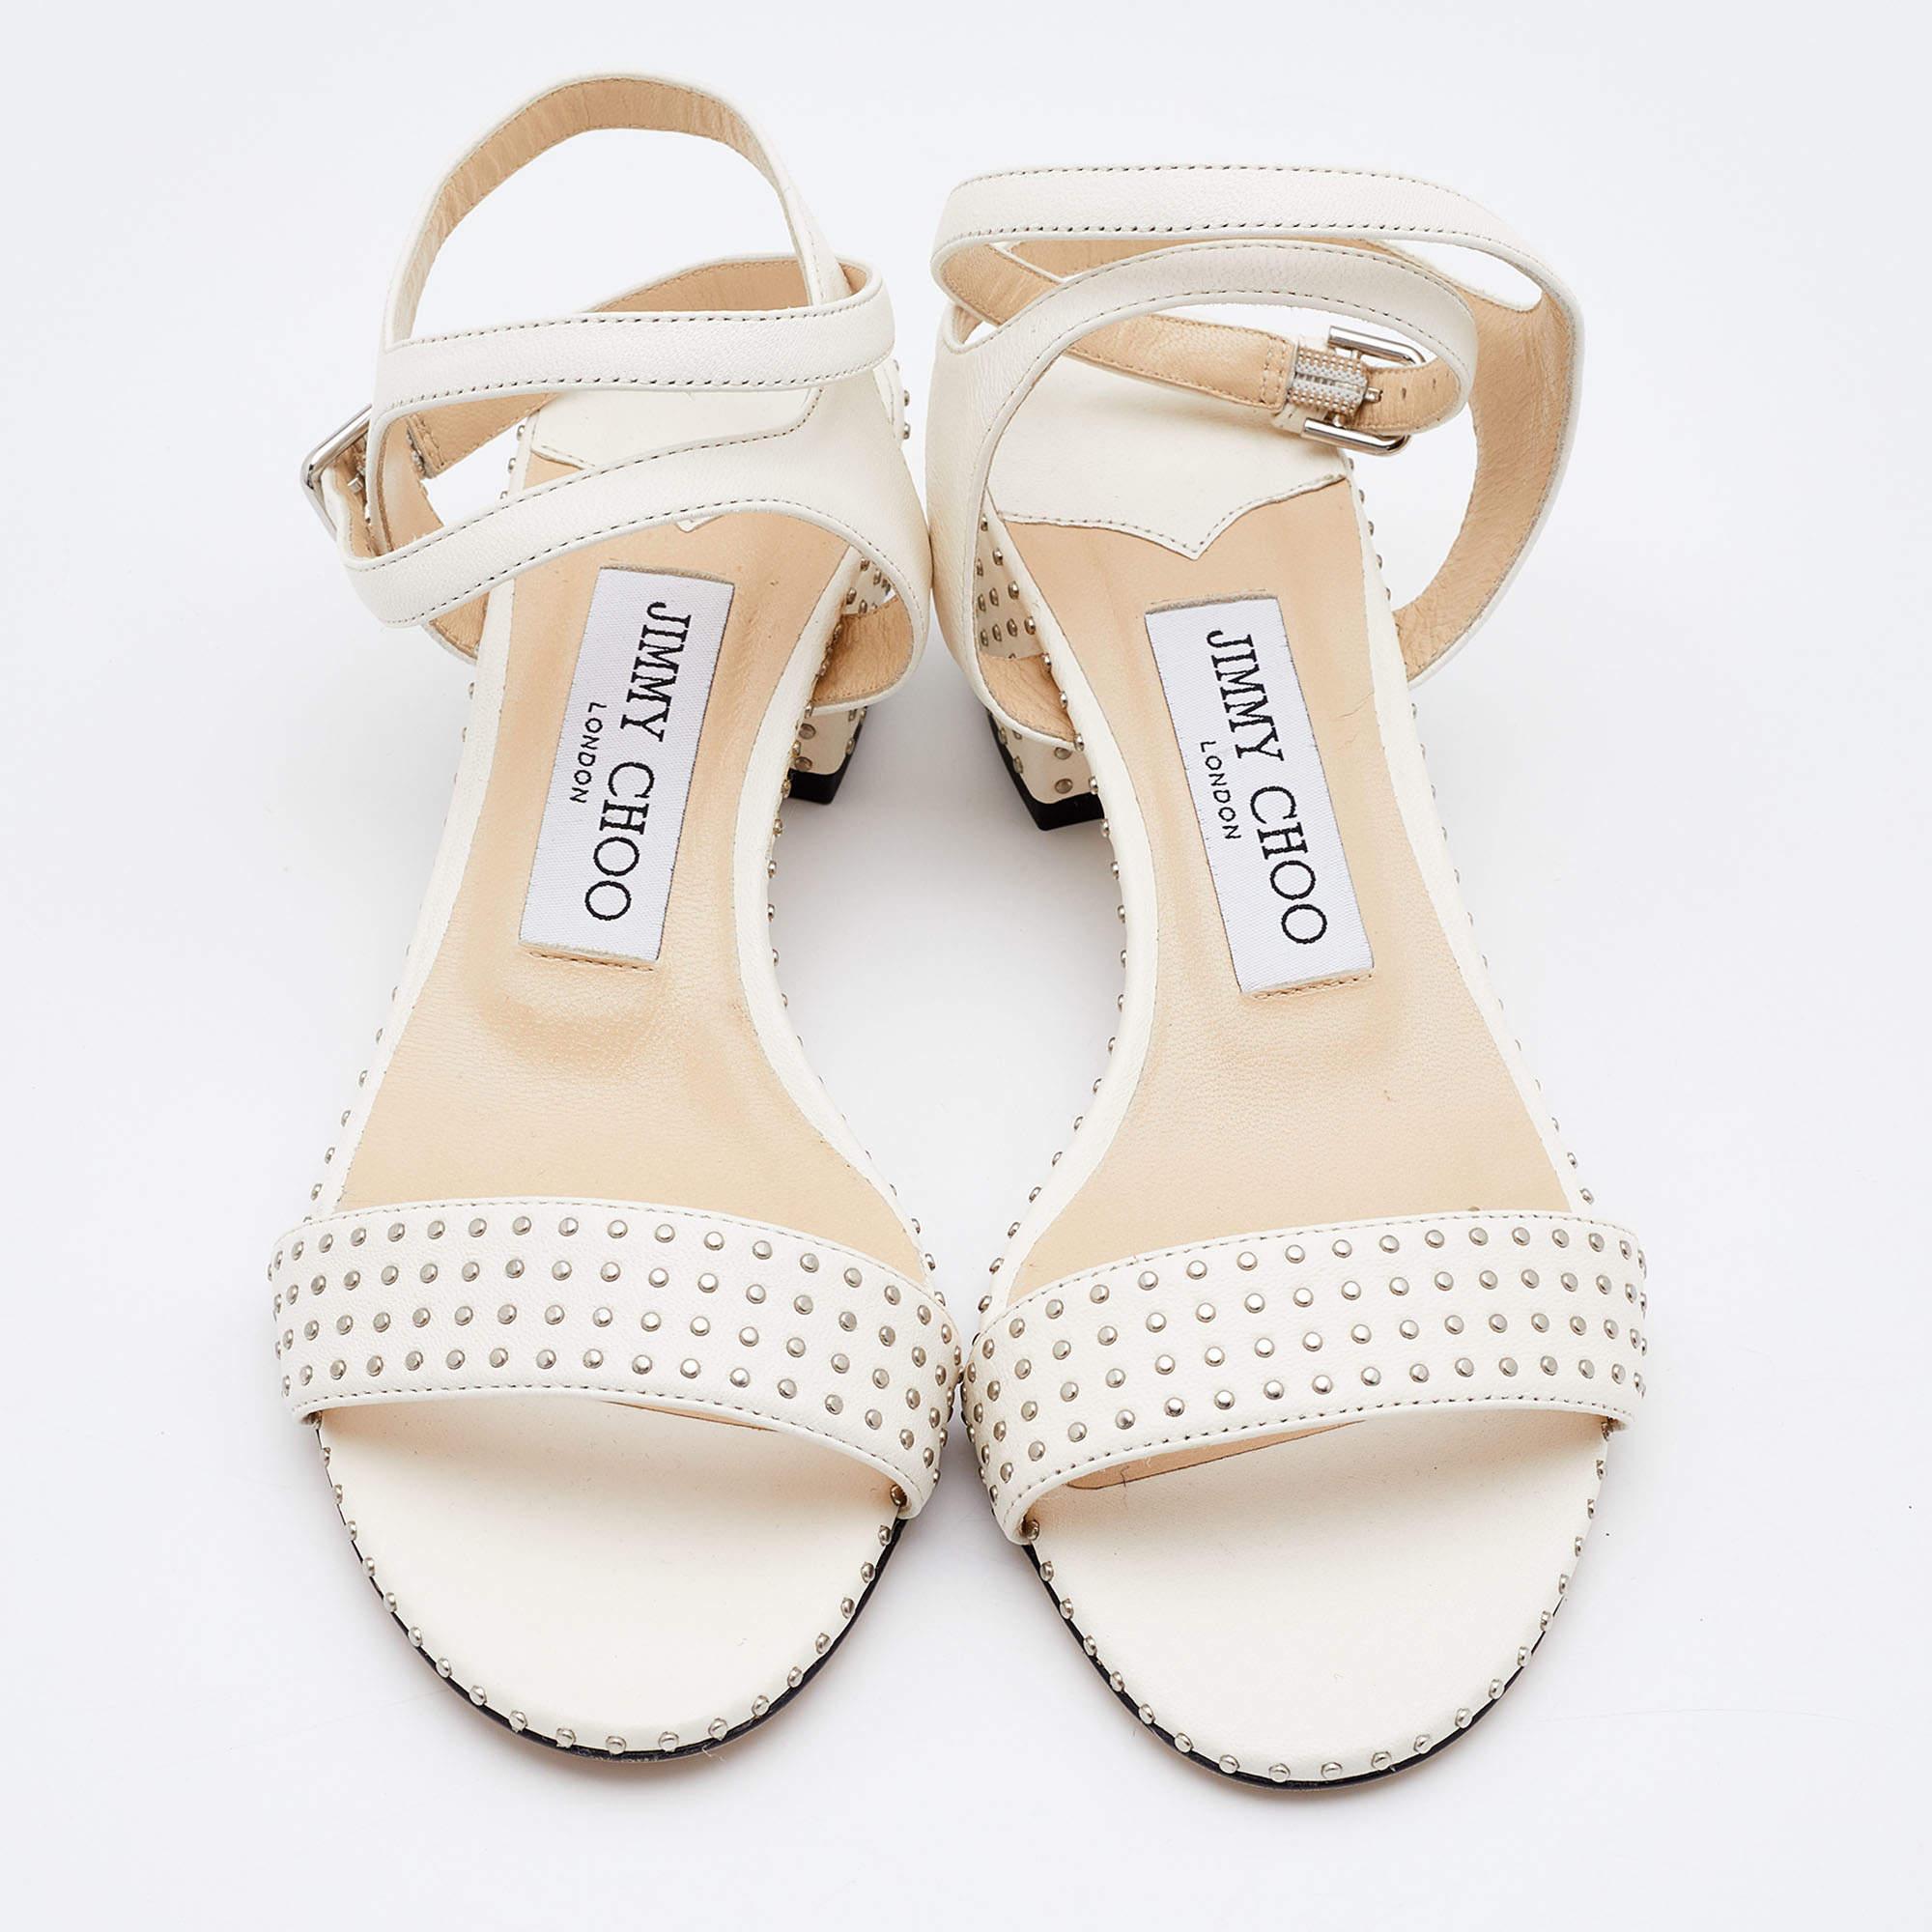 These timeless Jimmy Choo shoes are meant to last you season after season. They have a comfortable fit and high-quality finish.

